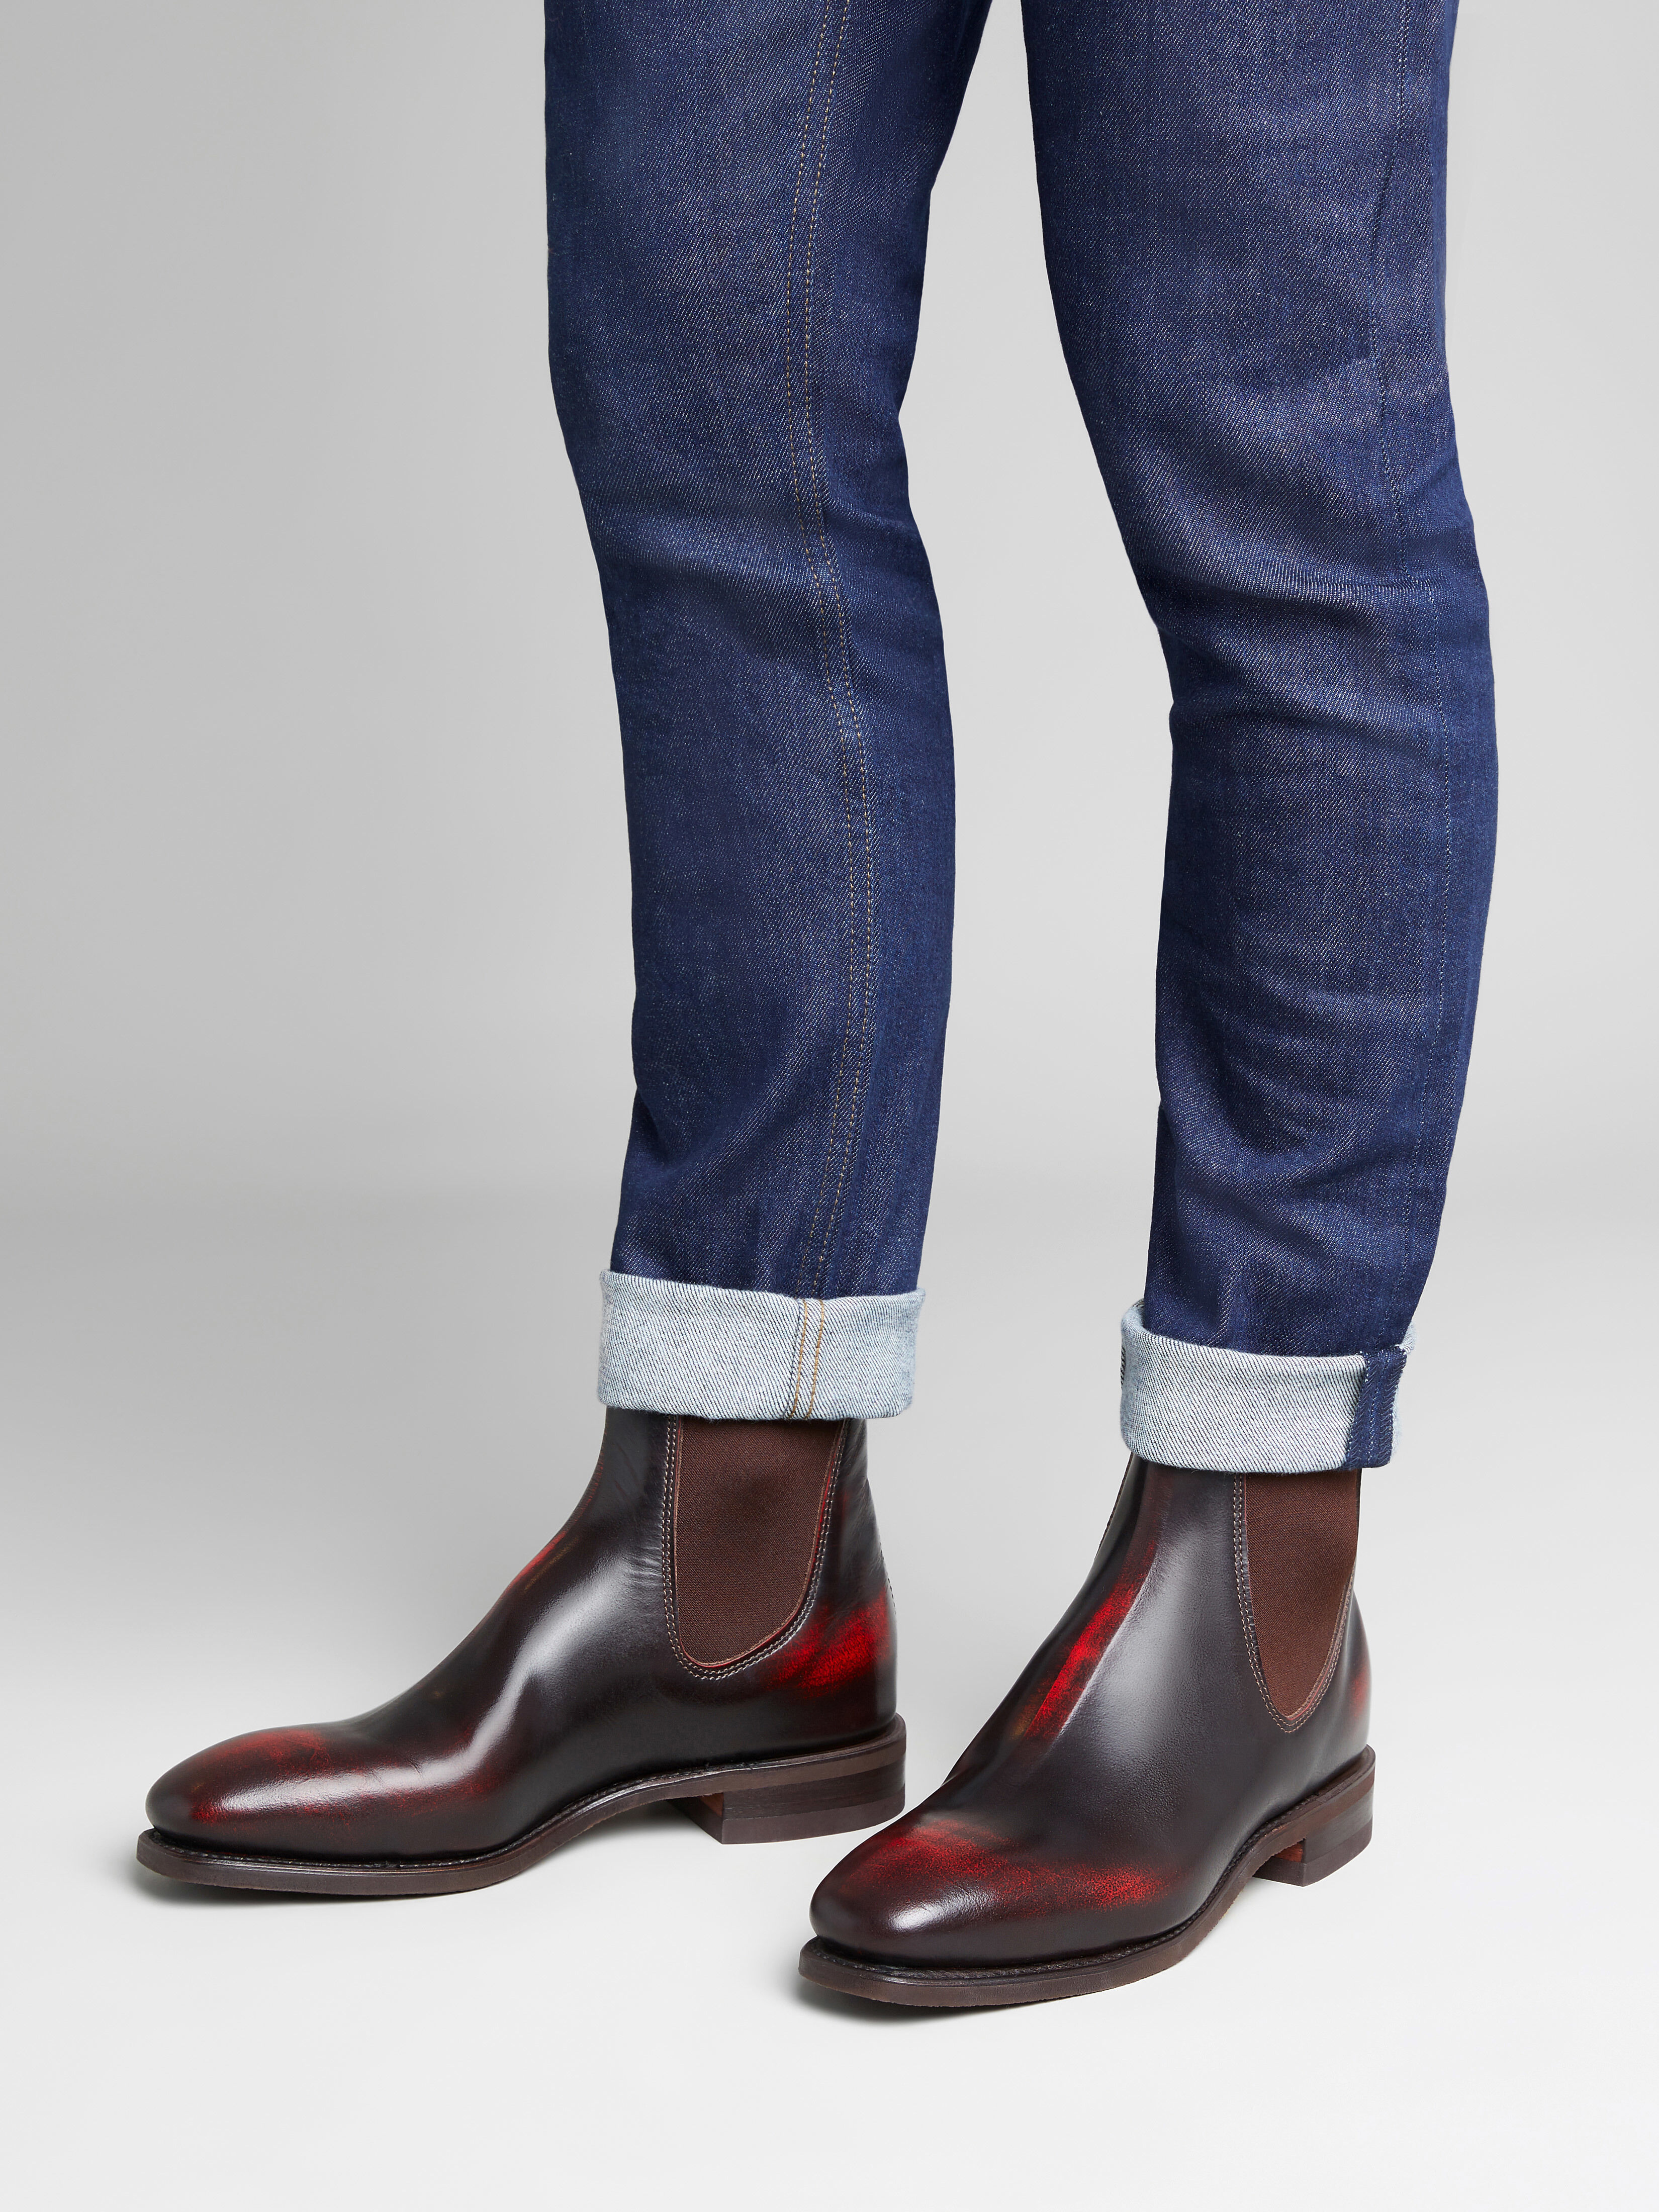 rm williams blue boots